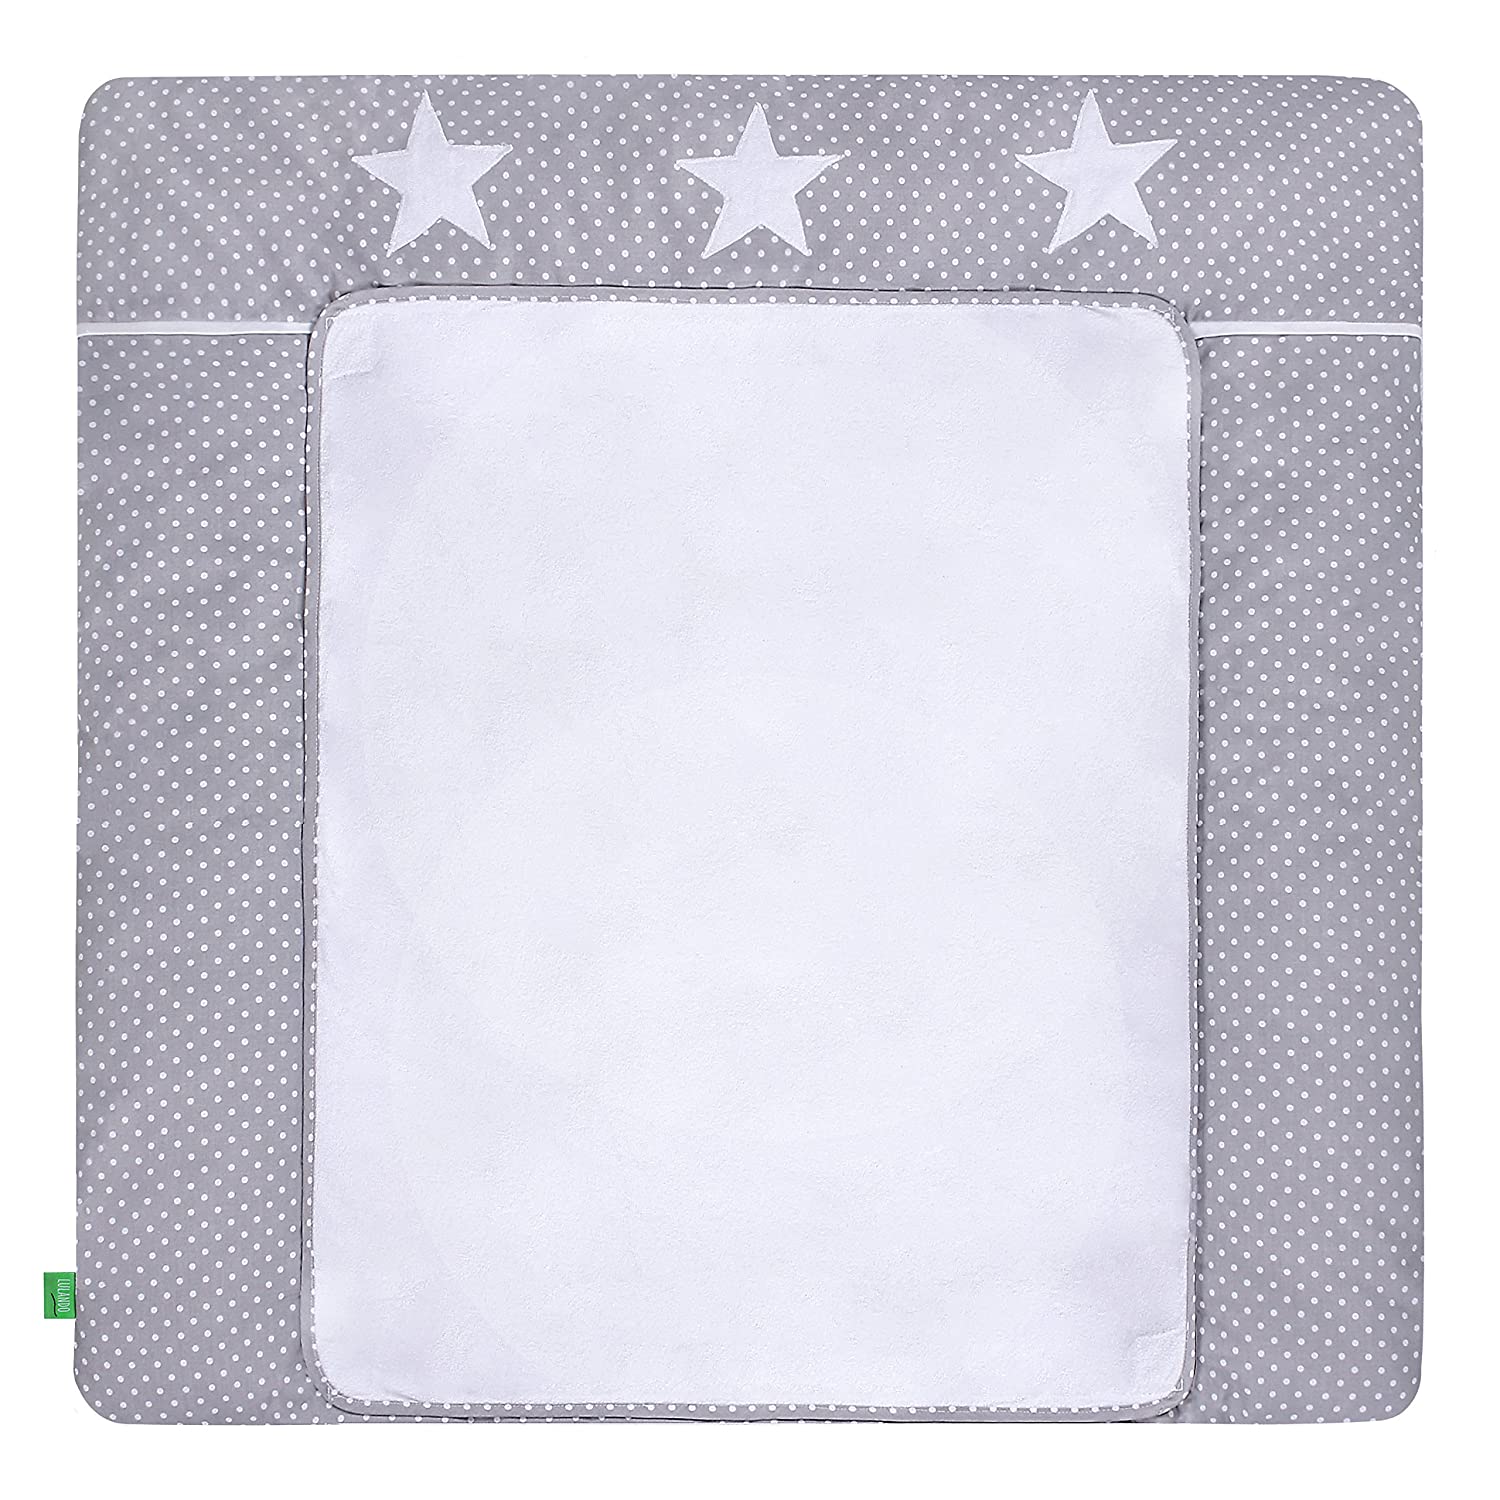 Lulando Changing Mat With 2 Removable Waterproof Covers - Outer Material 10